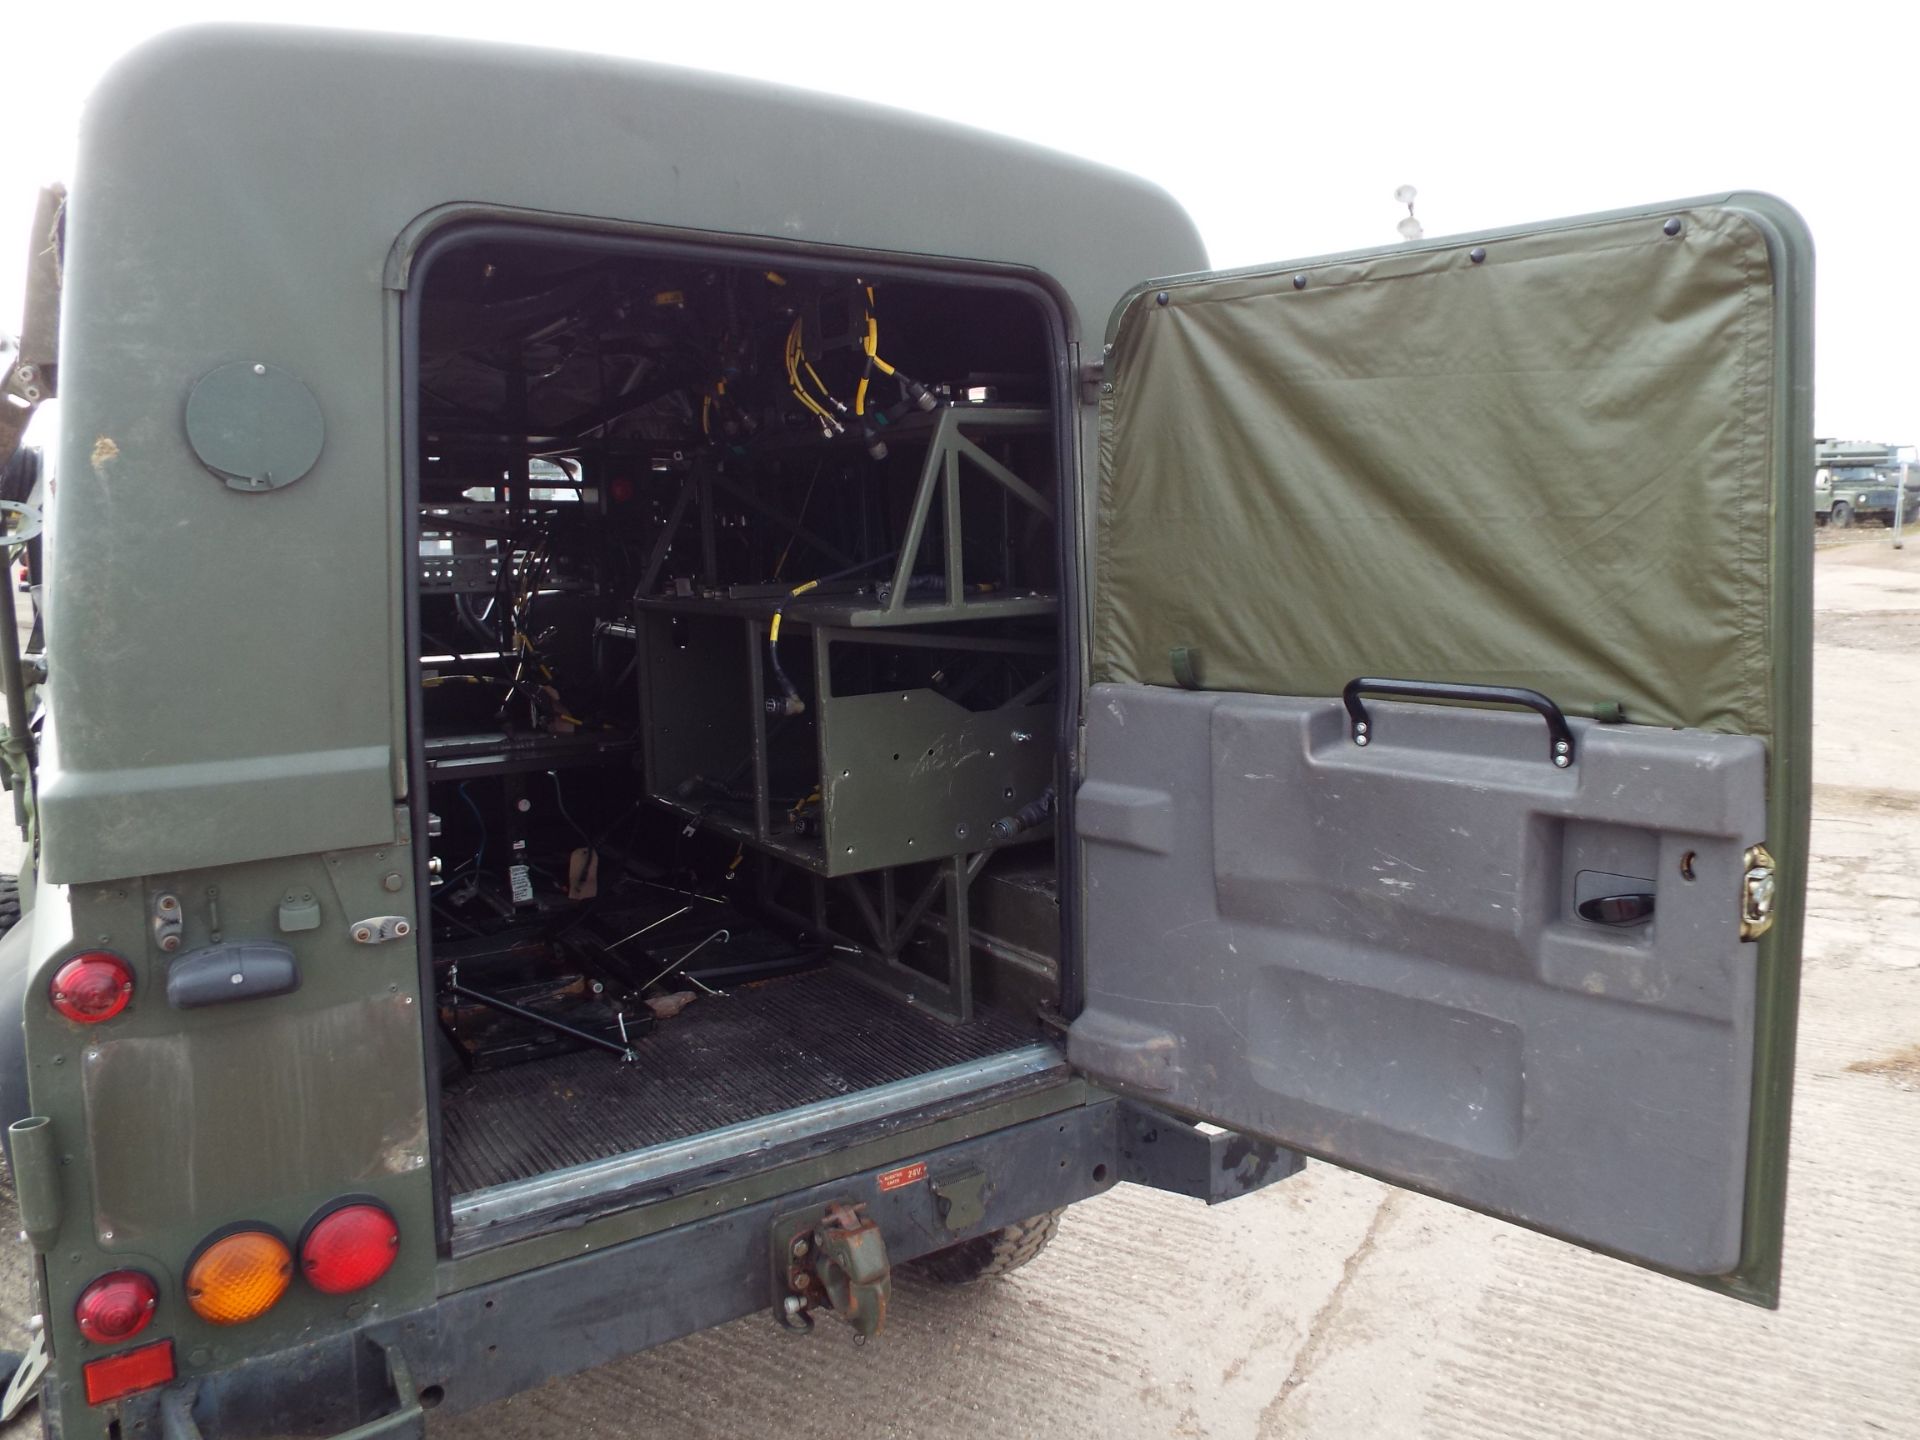 Military Specification Land Rover Wolf 110 Hard Top - Image 16 of 25